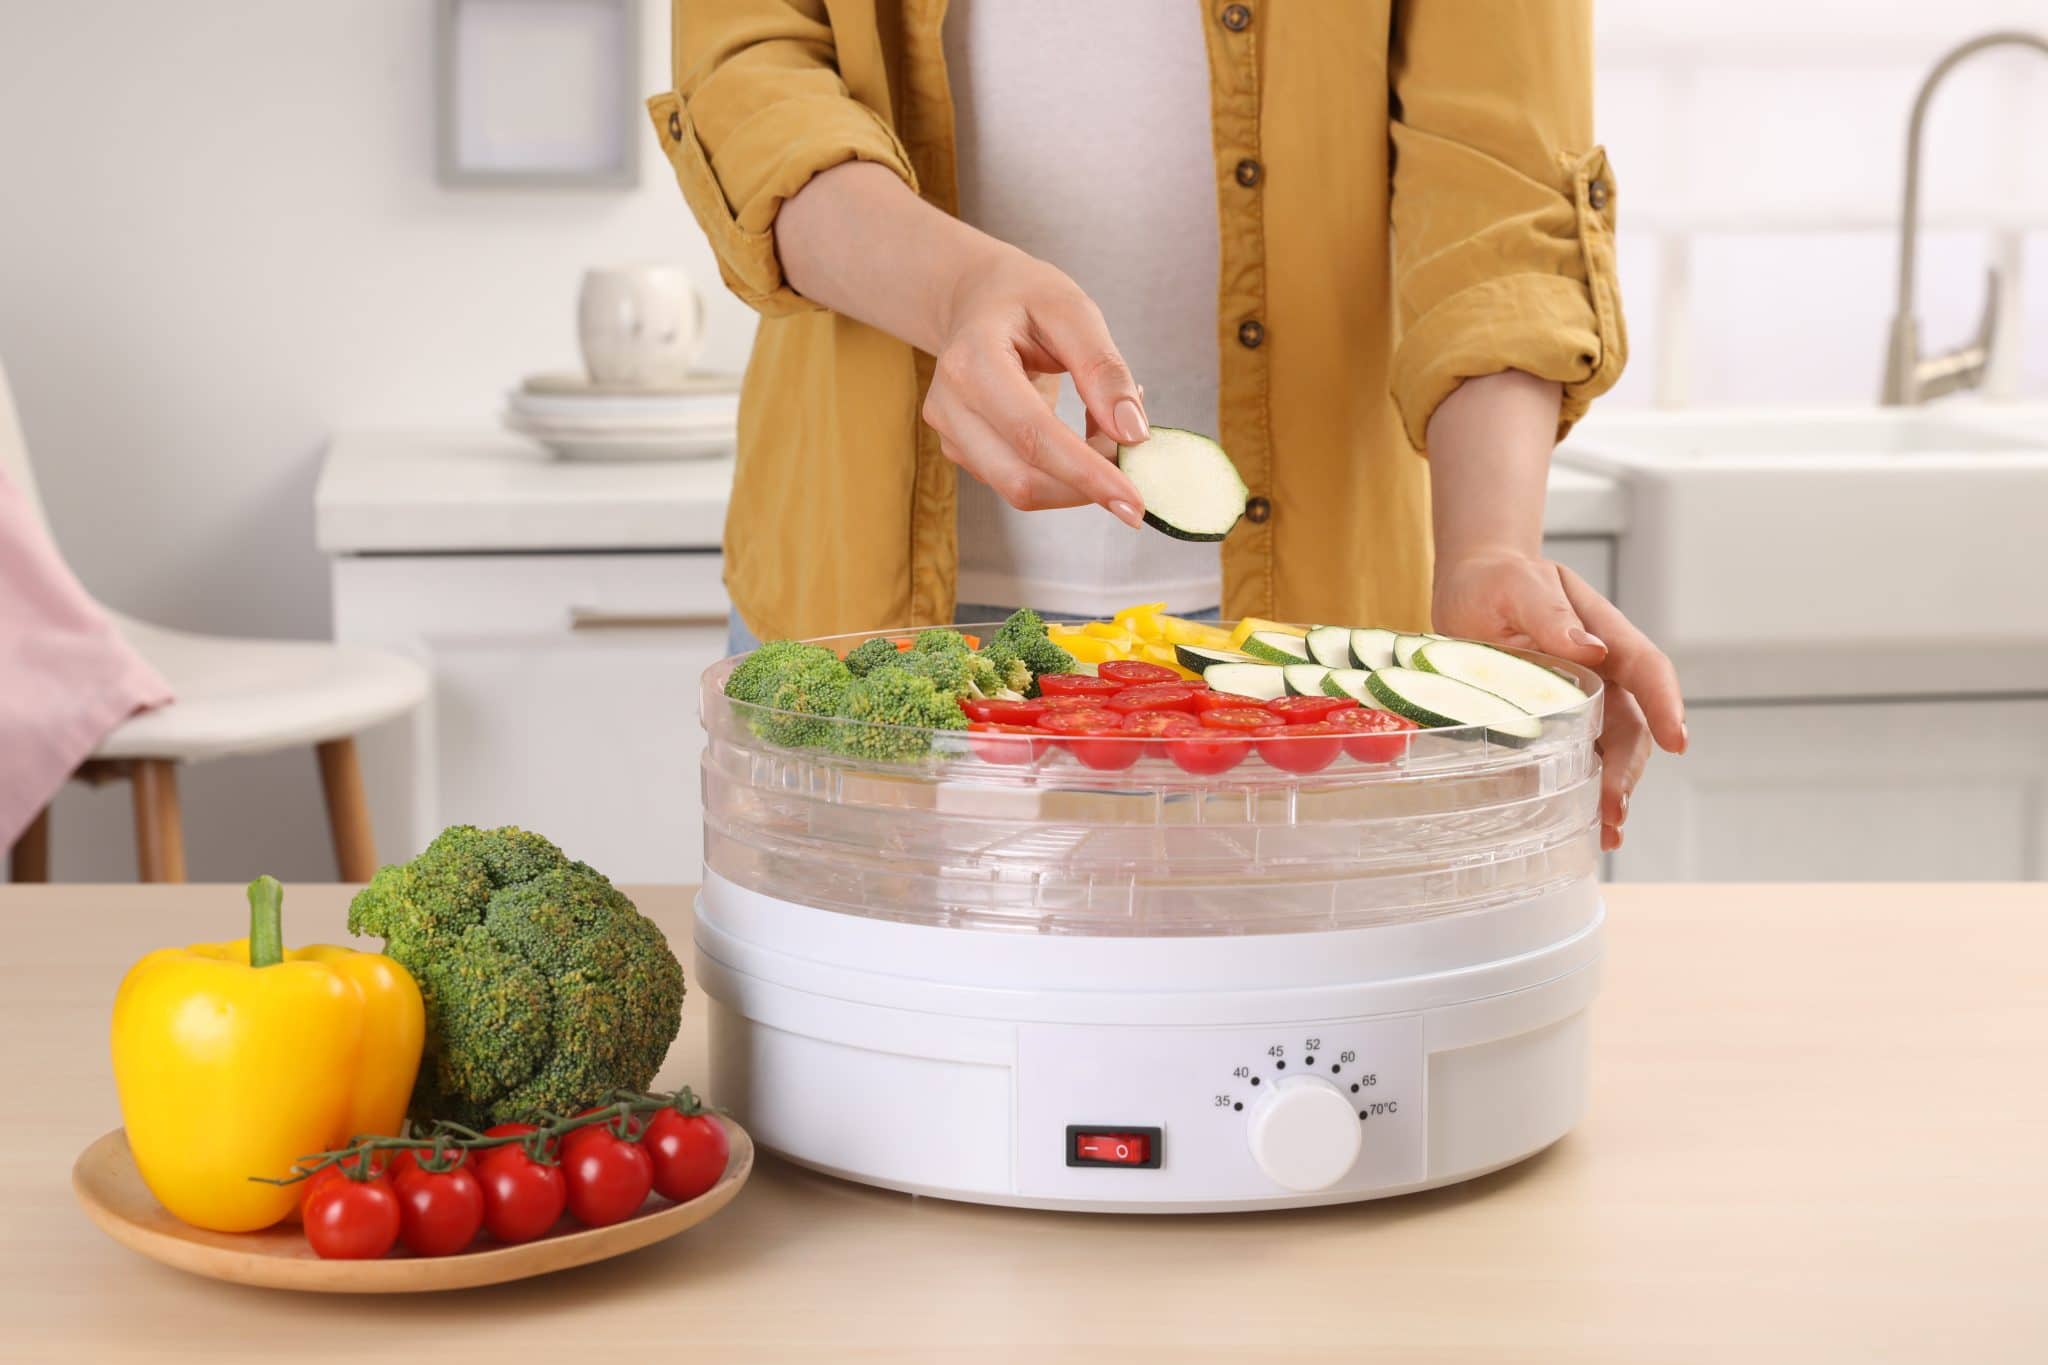 https://onedoessimply.com/wp-content/uploads/2020/09/Mini-Food-Dehydrator-scaled.jpg